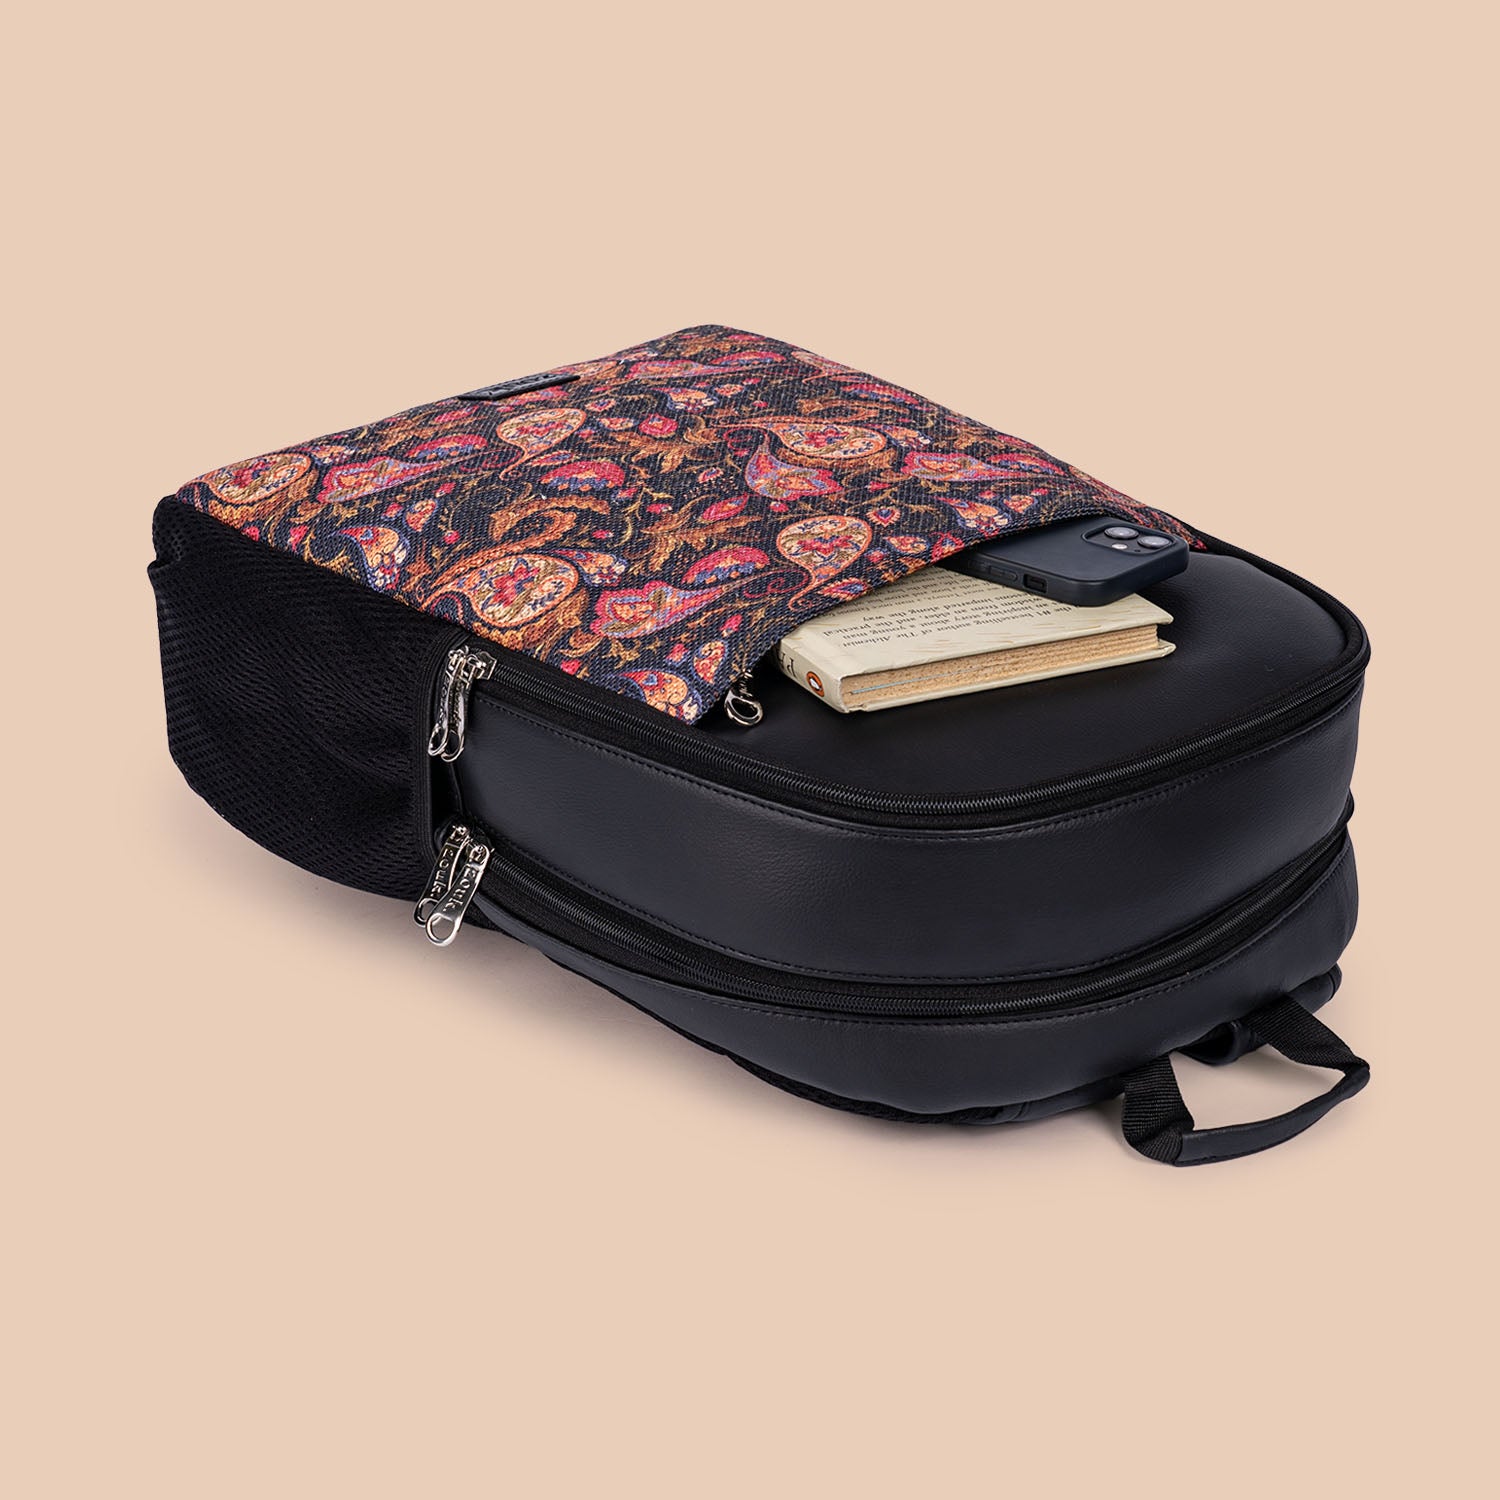 Paisley Print Statement Backpack